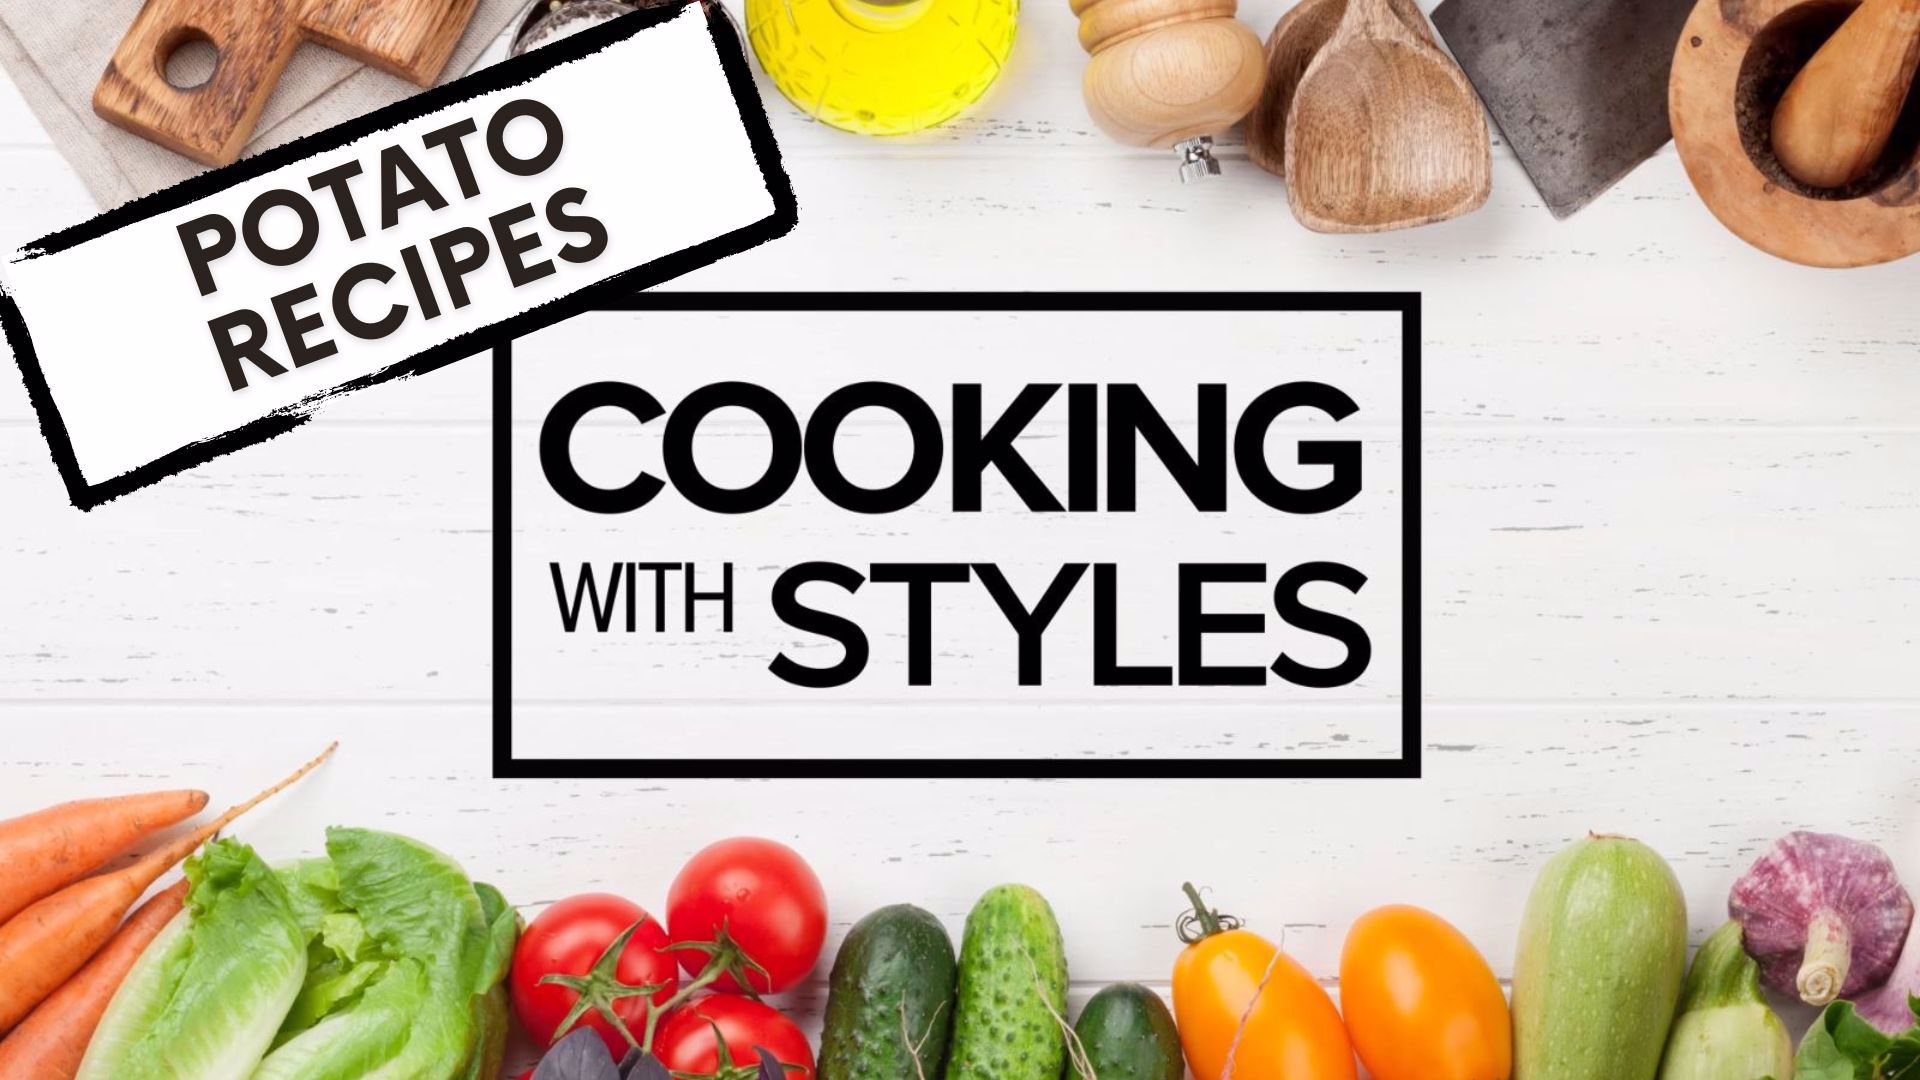 KFMB's Shawn Styles shares some of his favorite potato recipes that will have you asking for more! From smash fried potatoes to twice baked and even gnocchi.